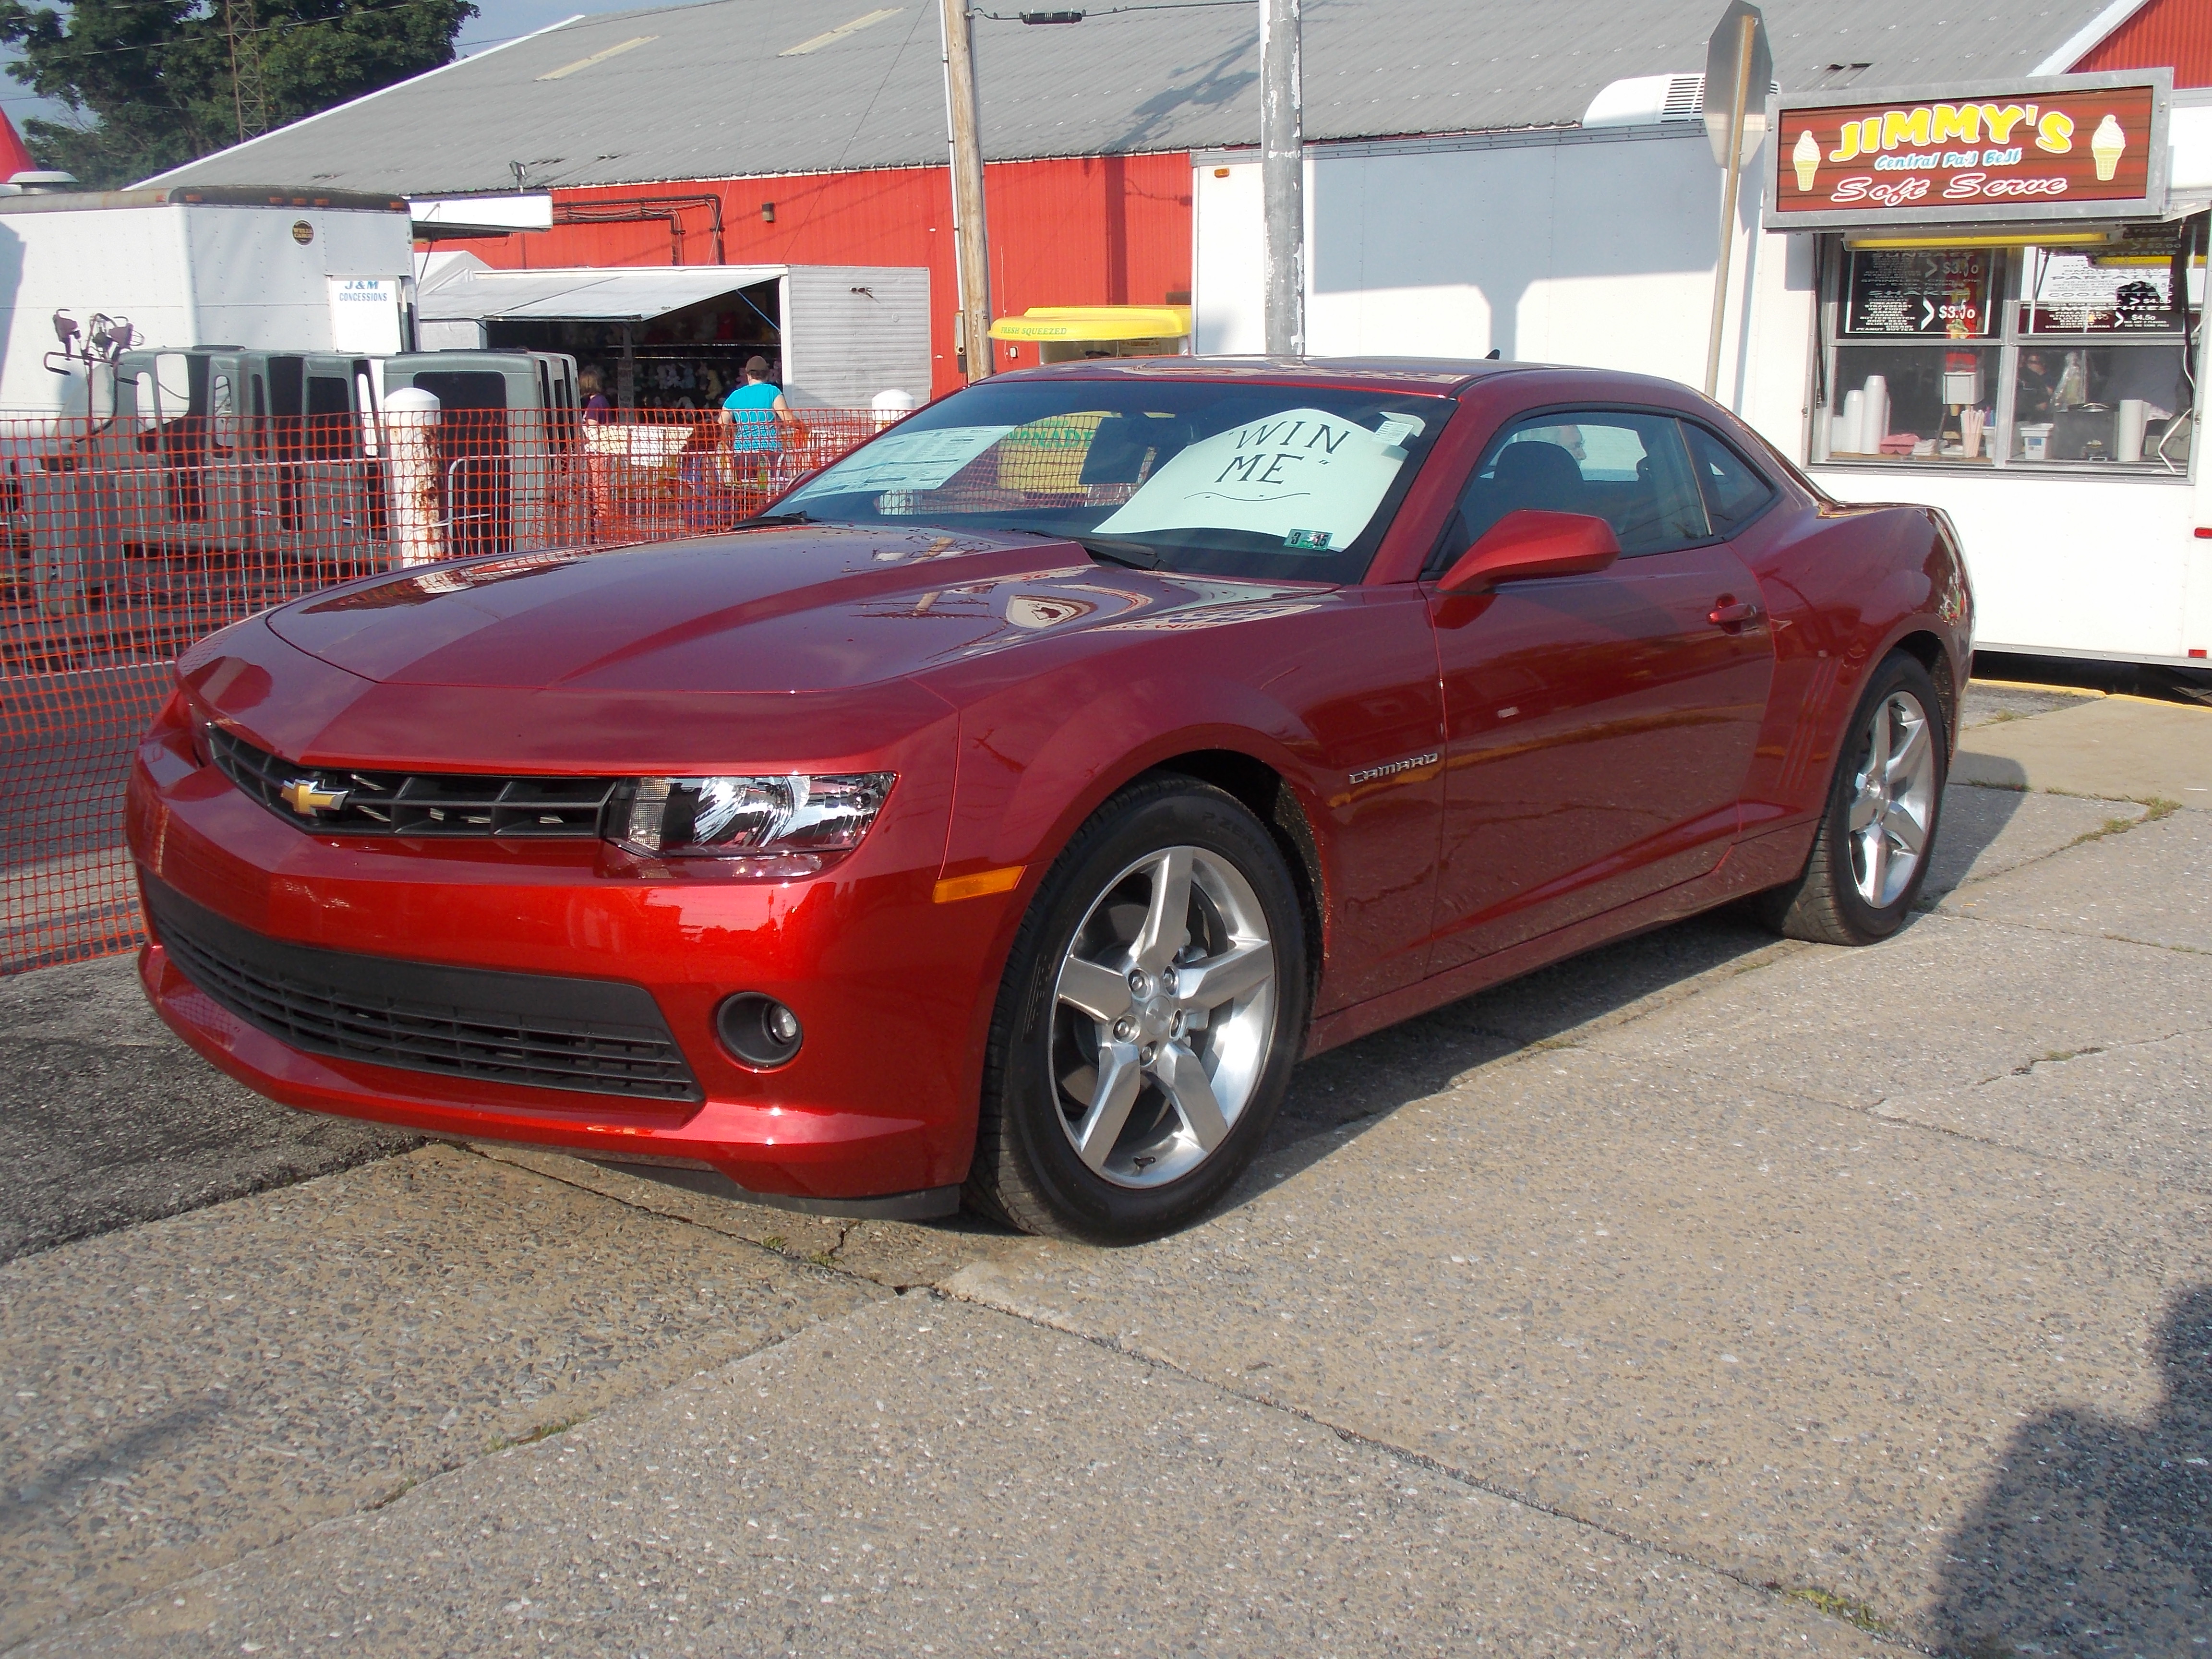 Pictured here is the Chevrolet Camaro that Blaize Alexander will give away during Heritage Days next weekend in Philipsburg. (Photo by Dustin Parks)